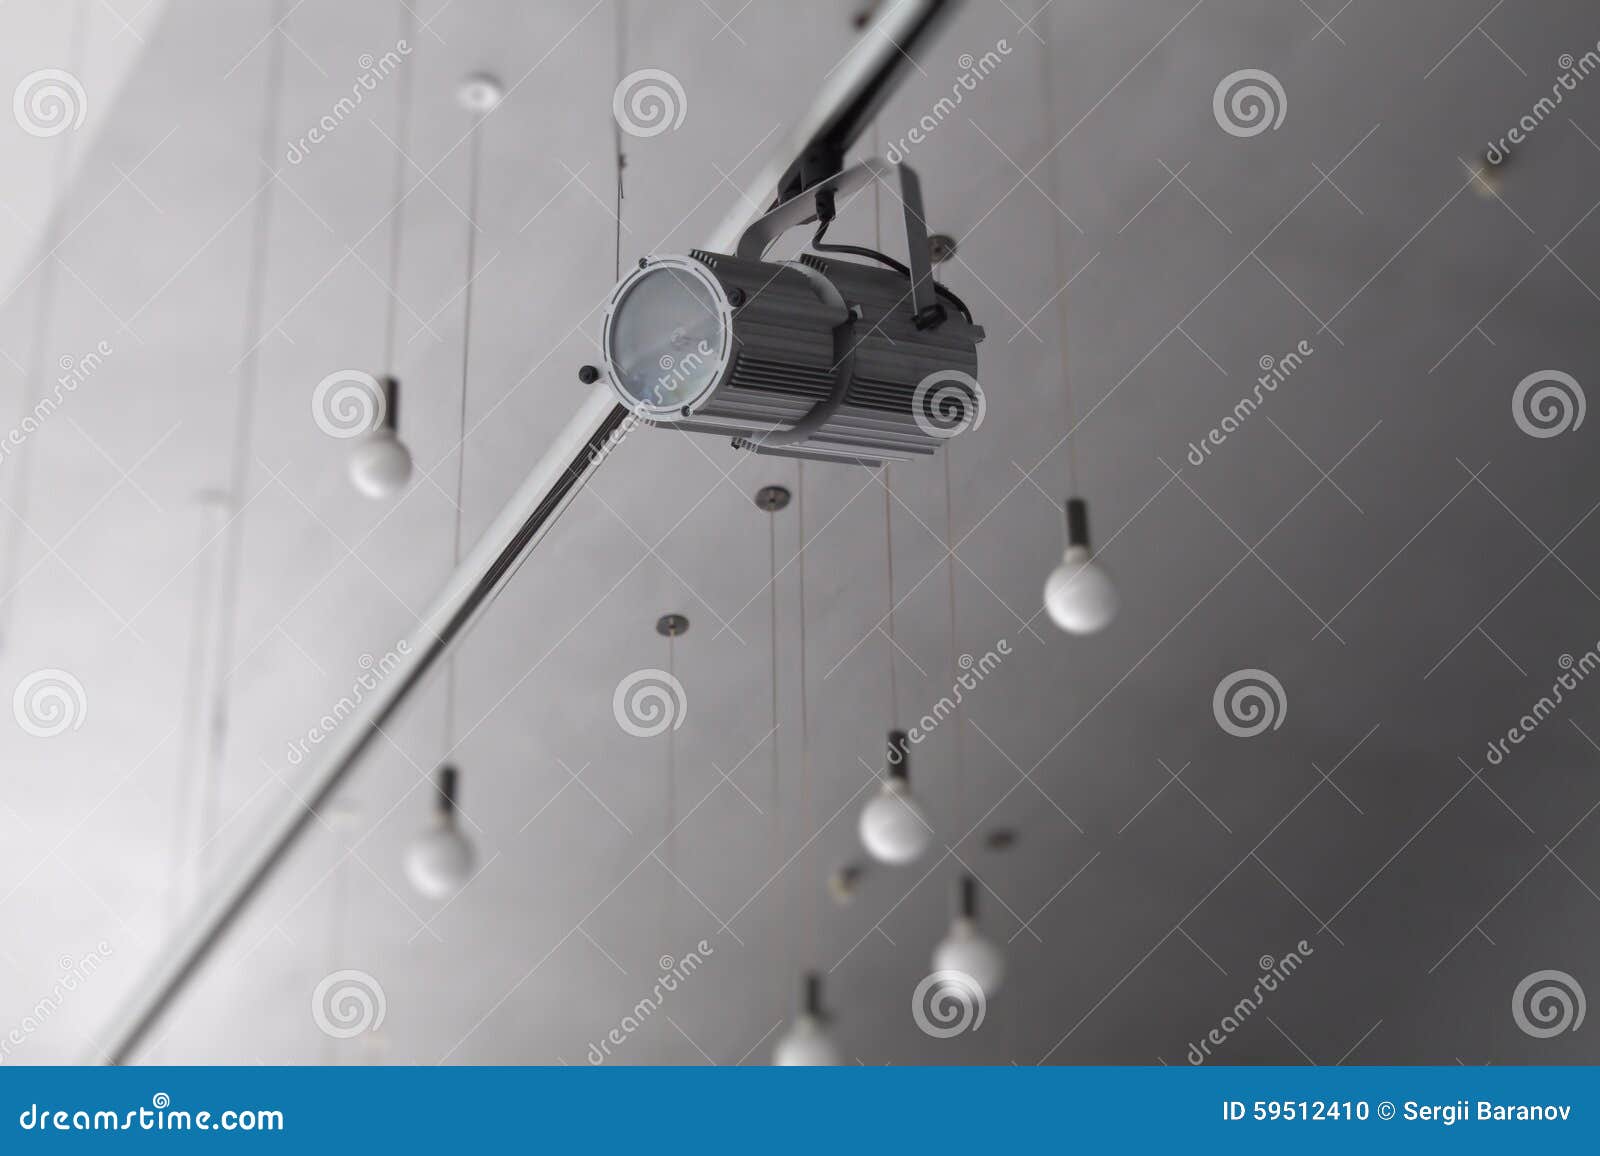 Round Lamps On Wires And Track Spotlights On Rail System At